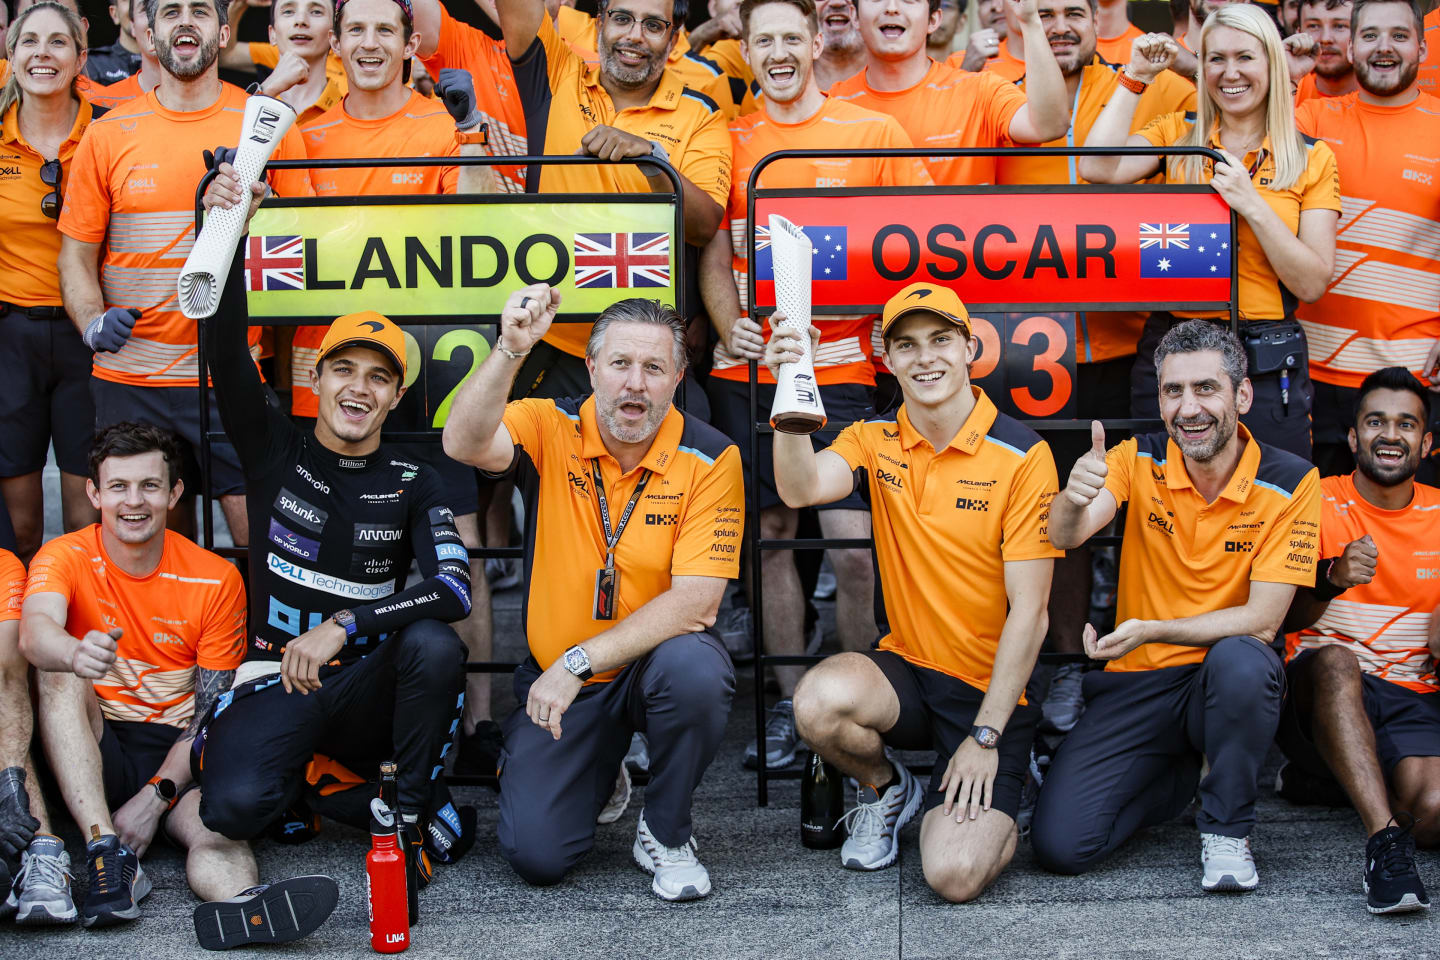 BARRETTO: McLaren's turnaround has been spectacular – but can they